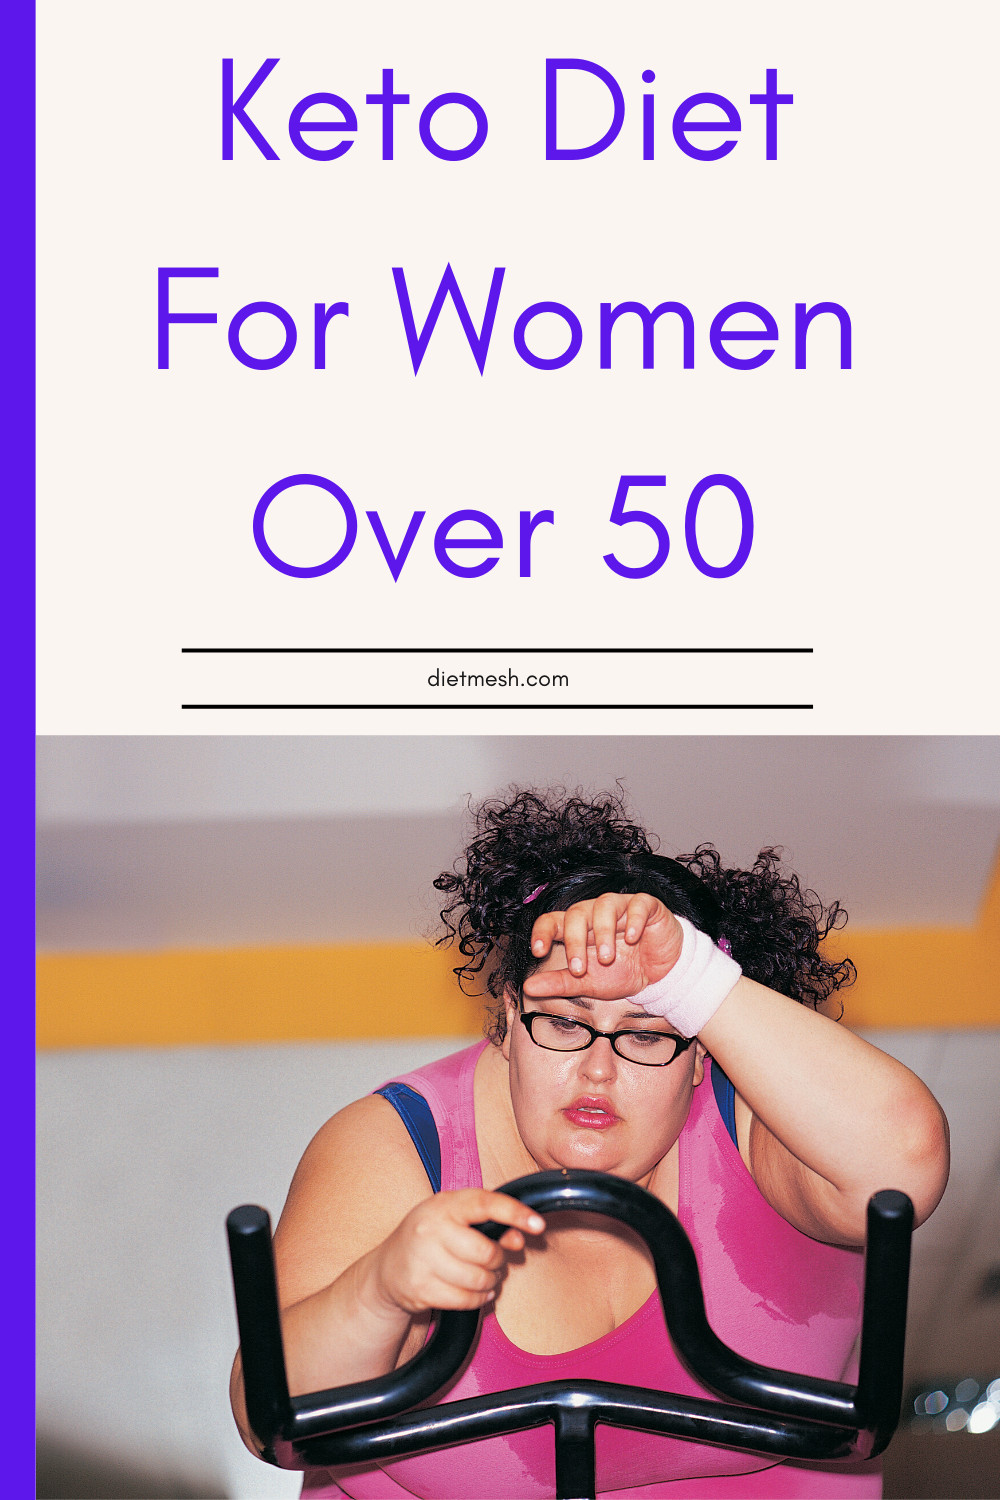 Keto Diet Plan For Women Over 50
 Pin on Keto Diet & Weight Loss